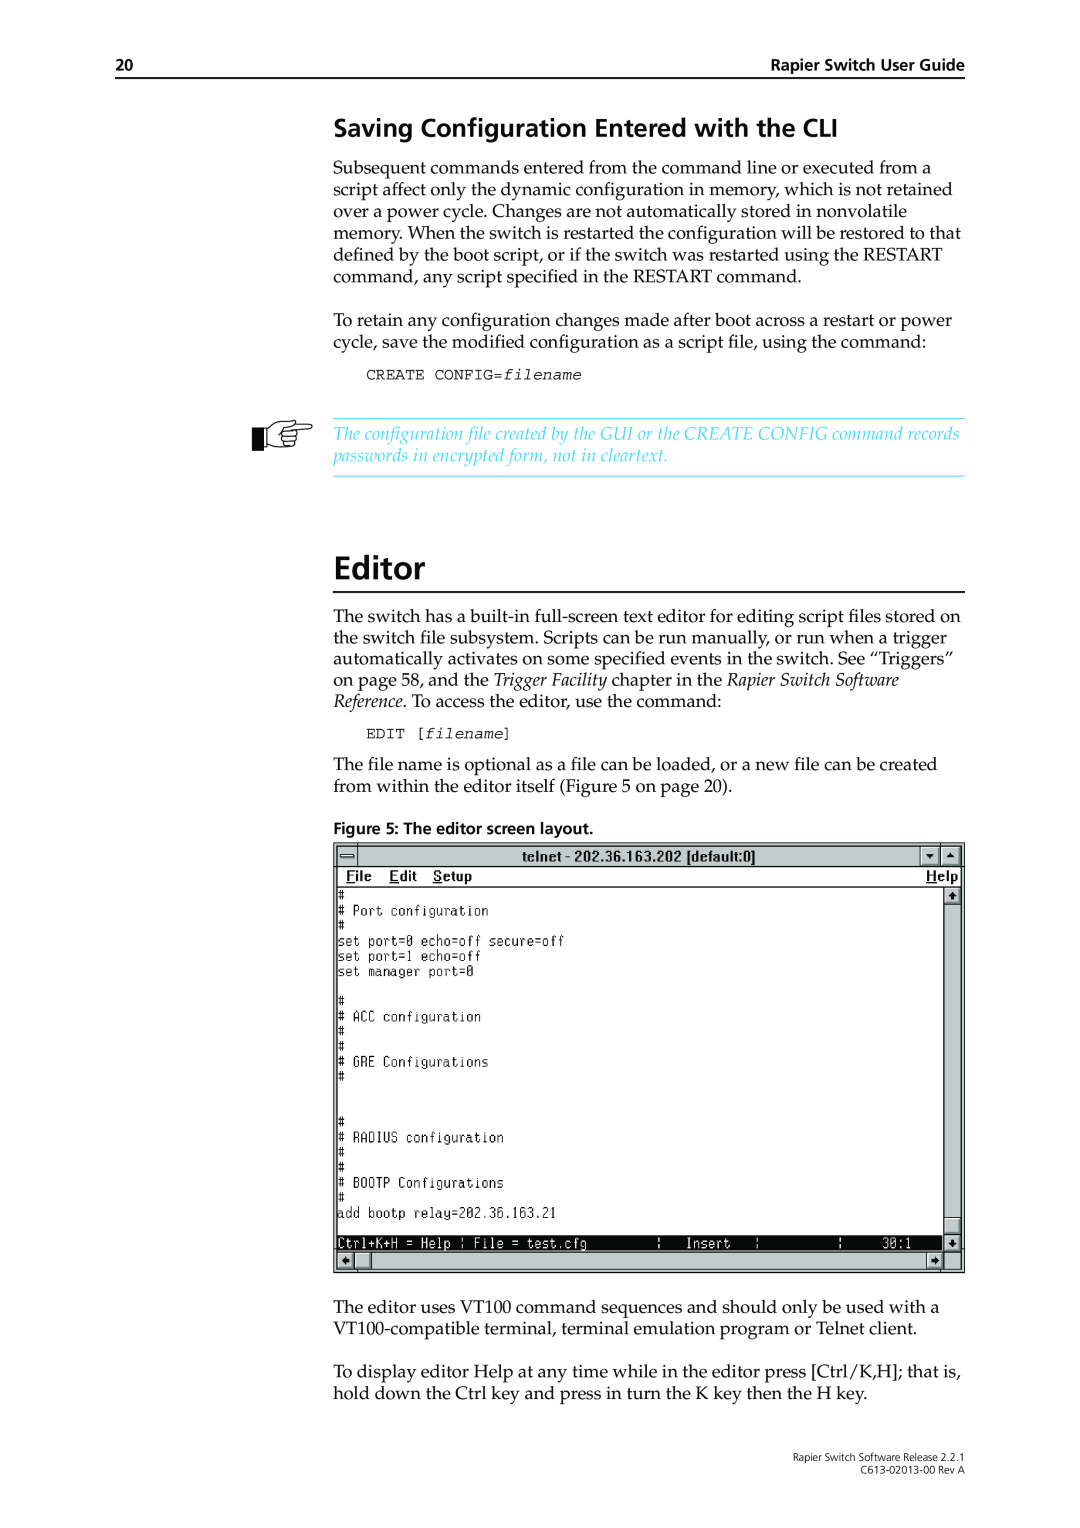 Allied Telesis C613-02013-00 manual Editor, Saving Configuration Entered with the CLI 